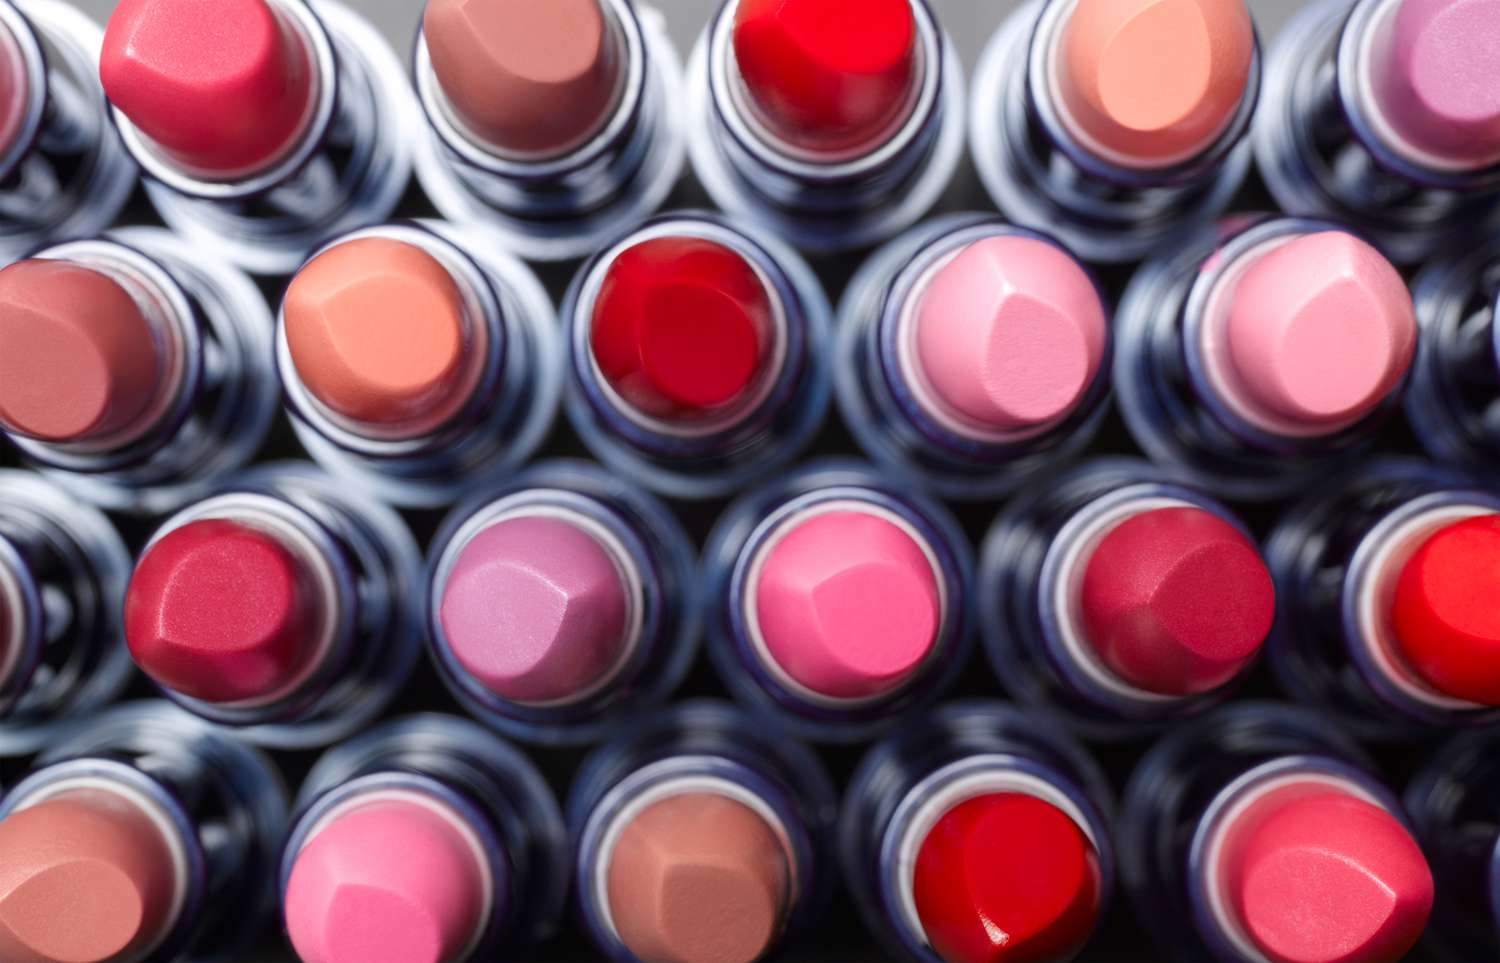 rows of lipstick from pinks to neutral shades